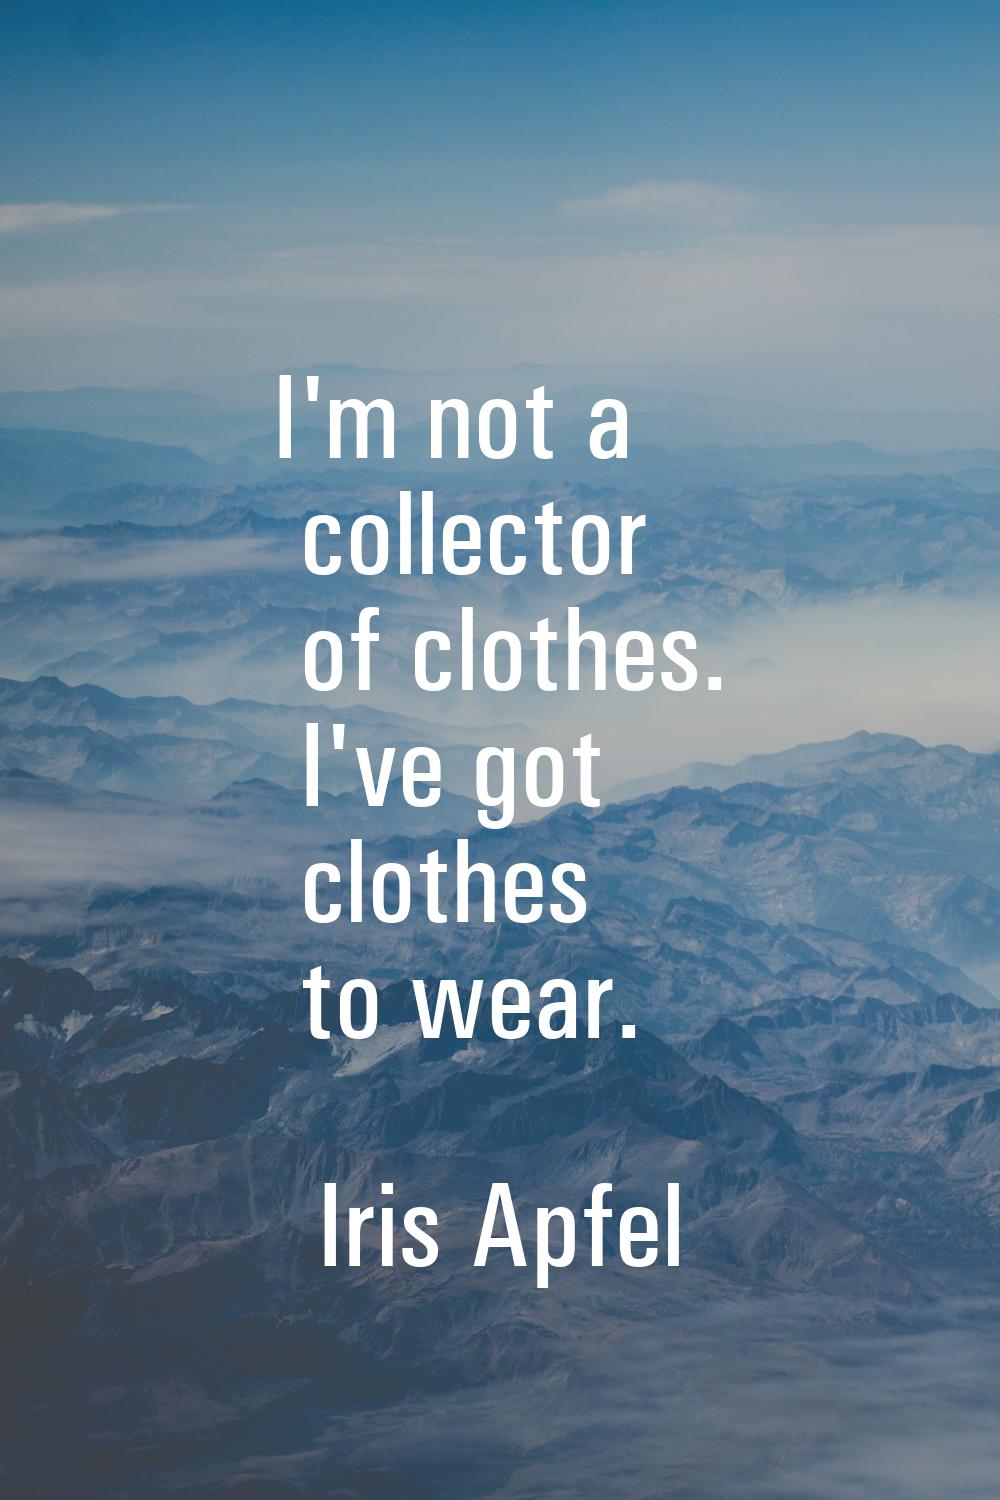 I'm not a collector of clothes. I've got clothes to wear.